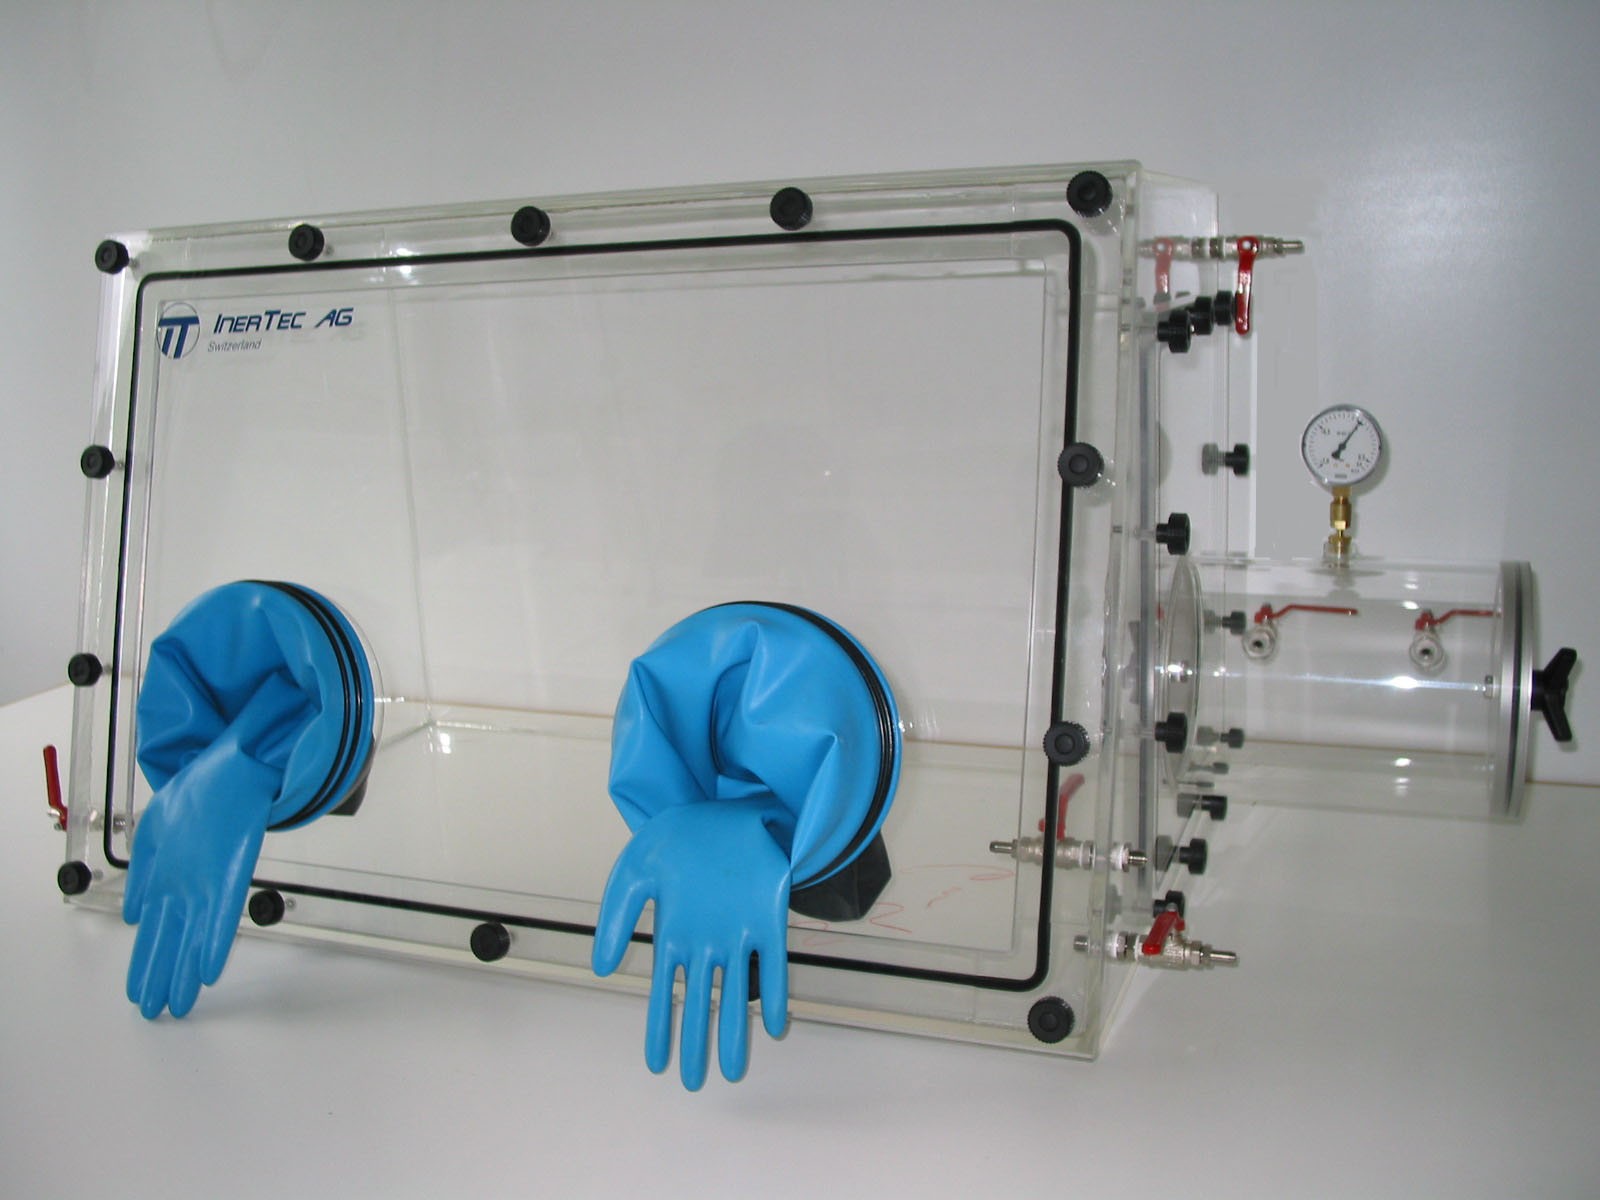 Glovebox made of acrylic&gt; Gas filling: automatic flushing with pressure control, front design: removable, side design: rectangular lock, control: humidity controller with data logger